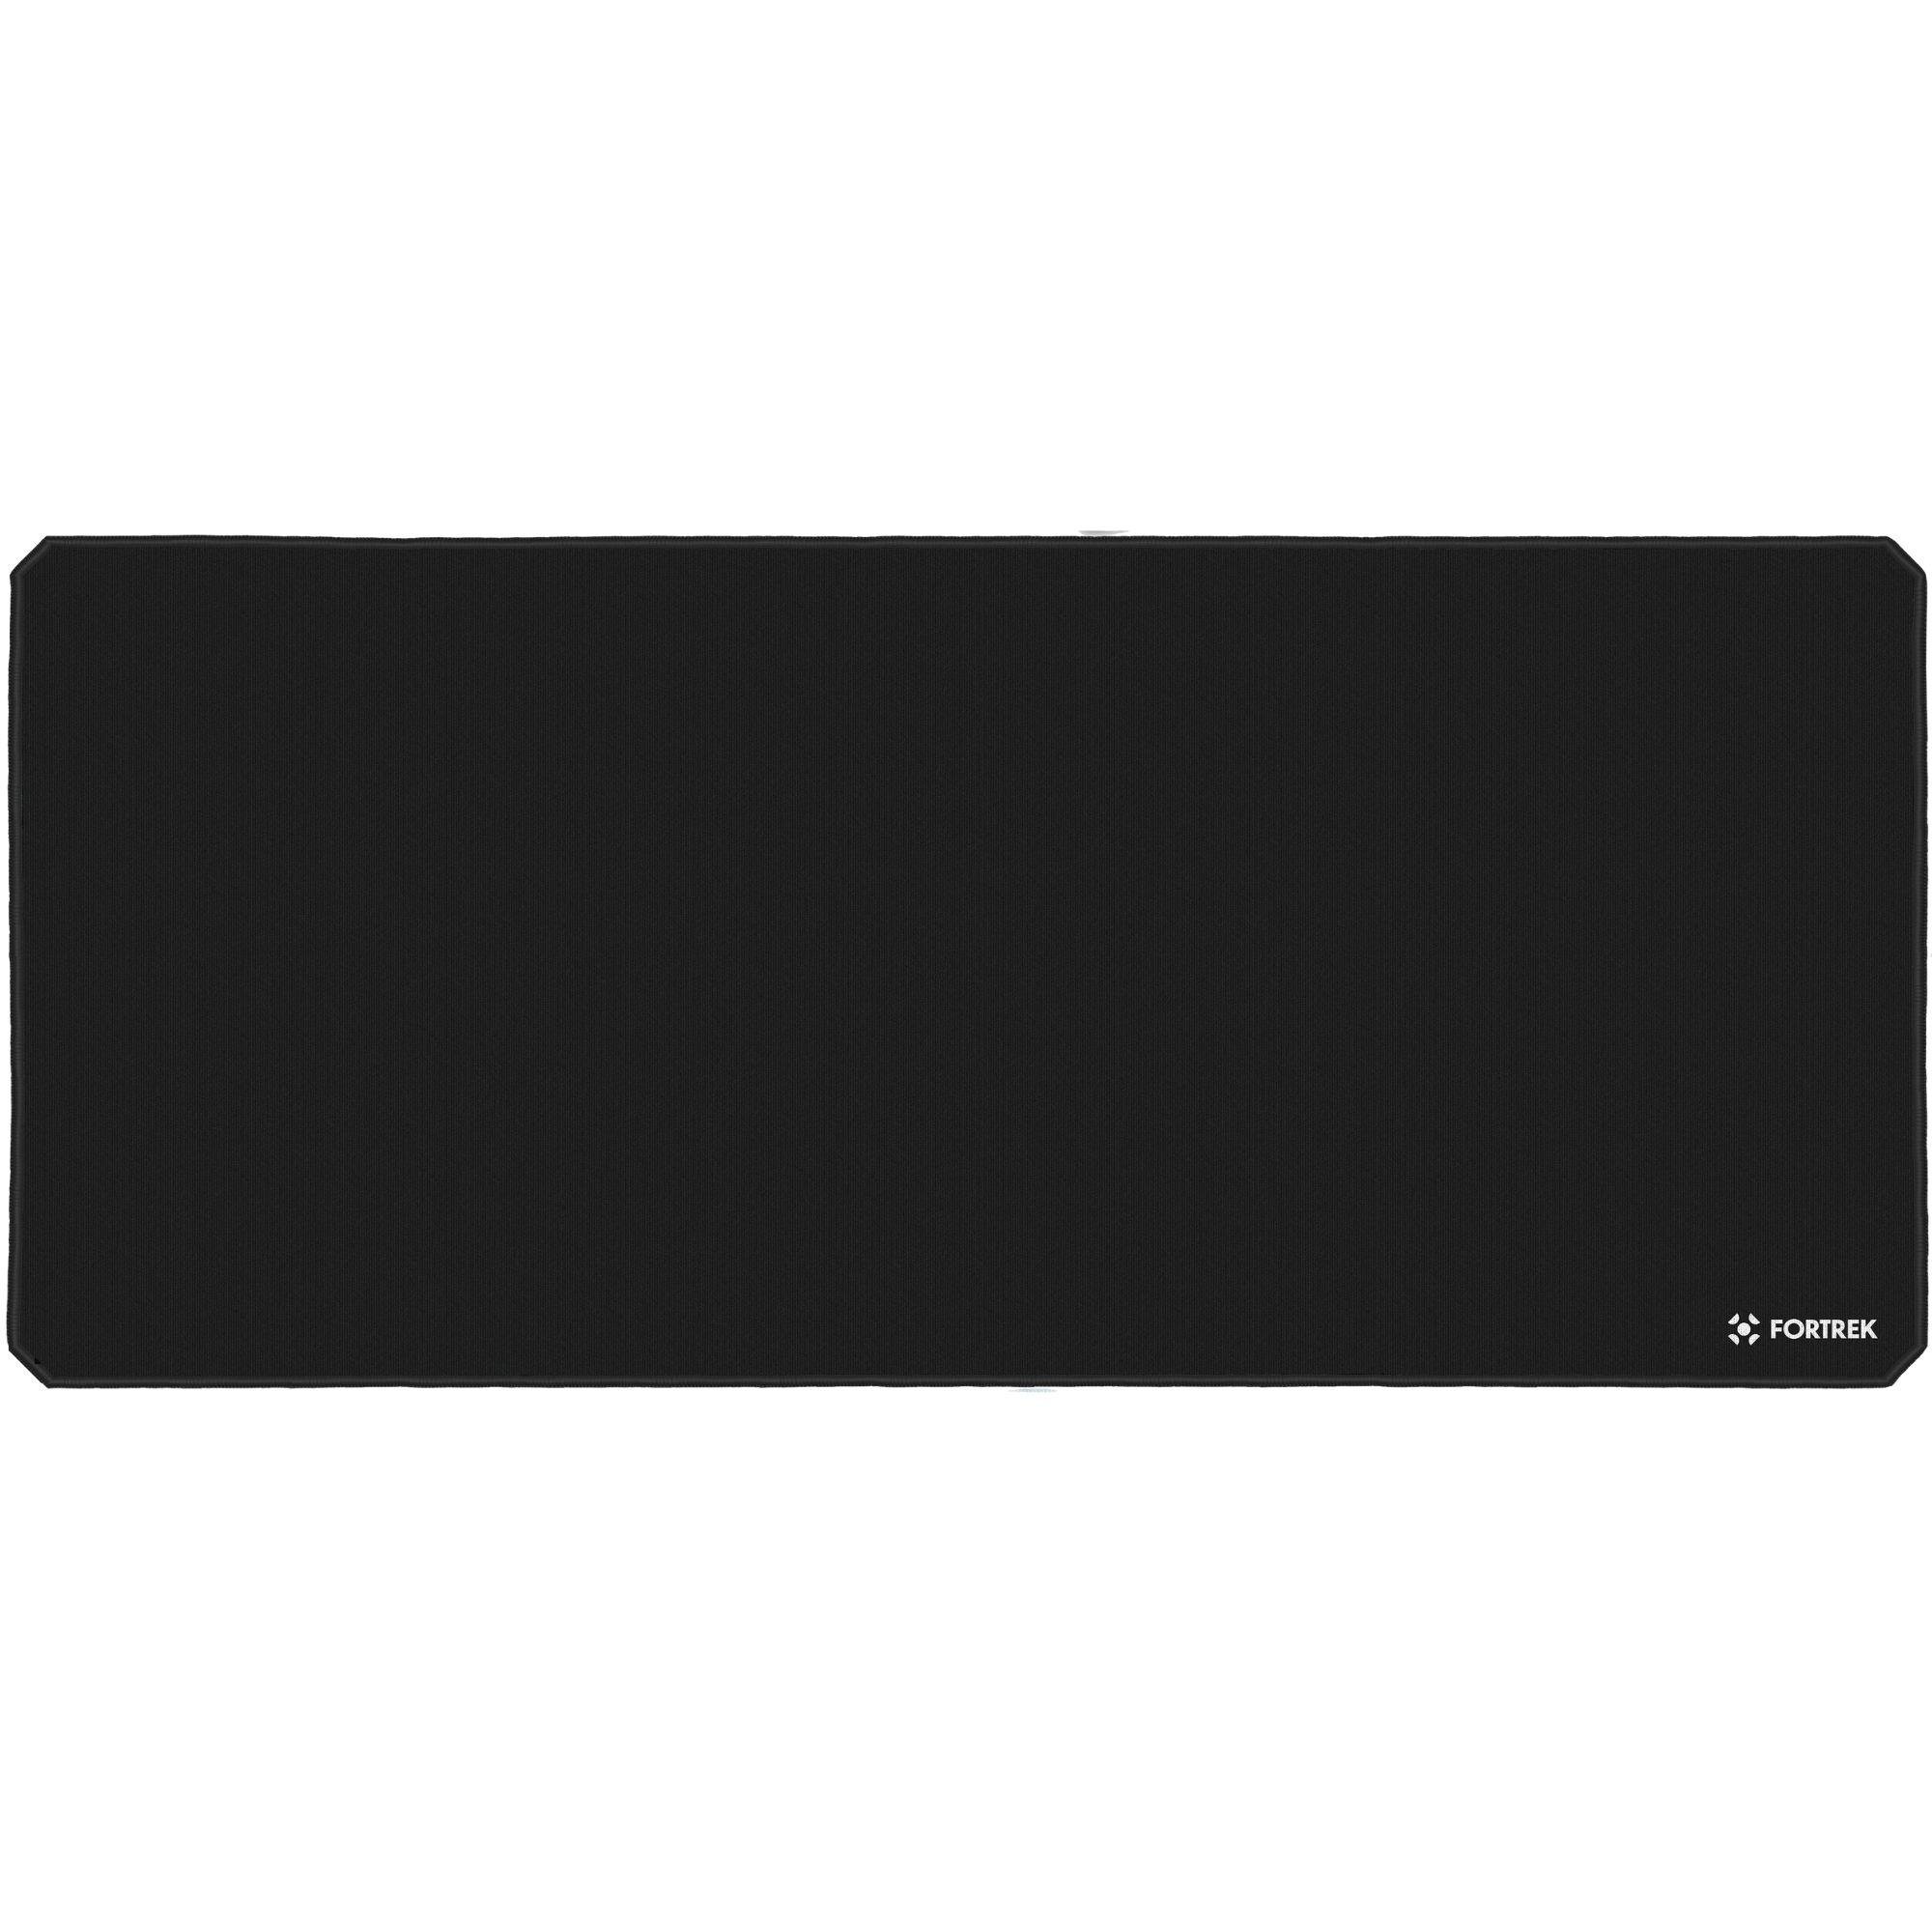 Mouse Pad Gamer Fortrek Speed MPG104 (900x400mm) Preto